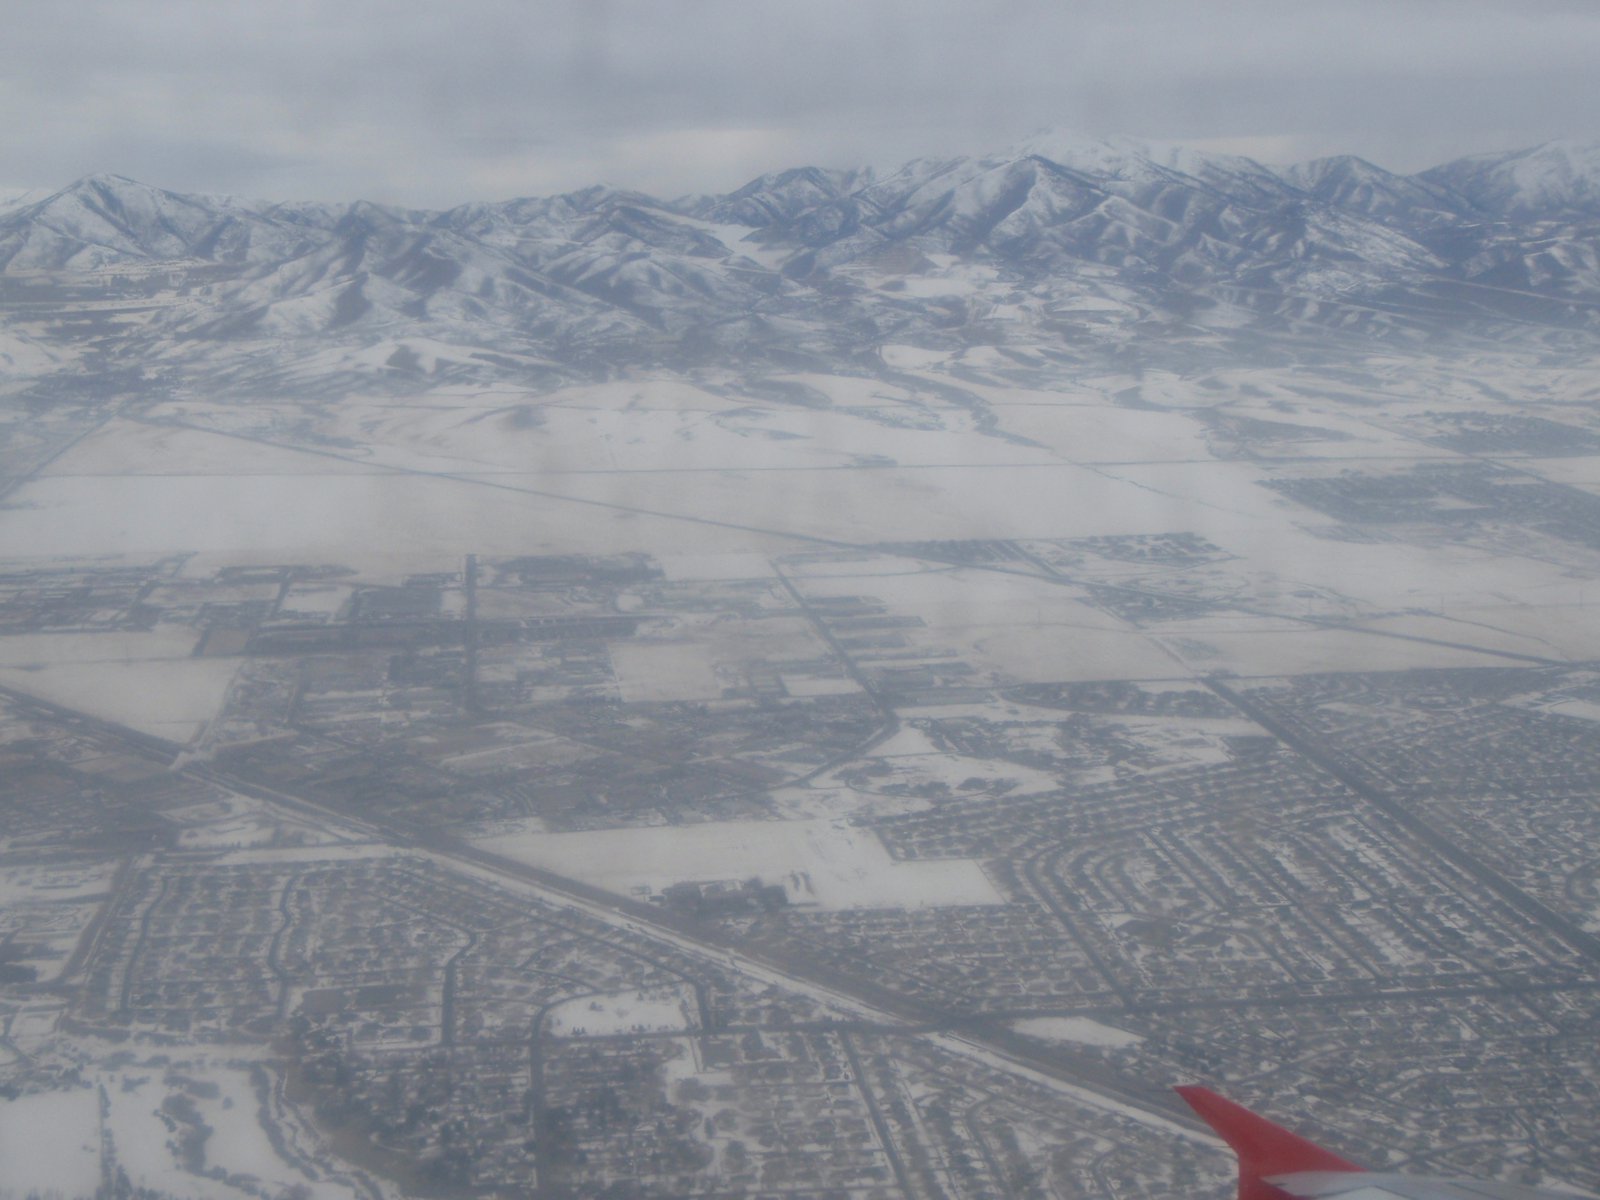 Flying into SLC